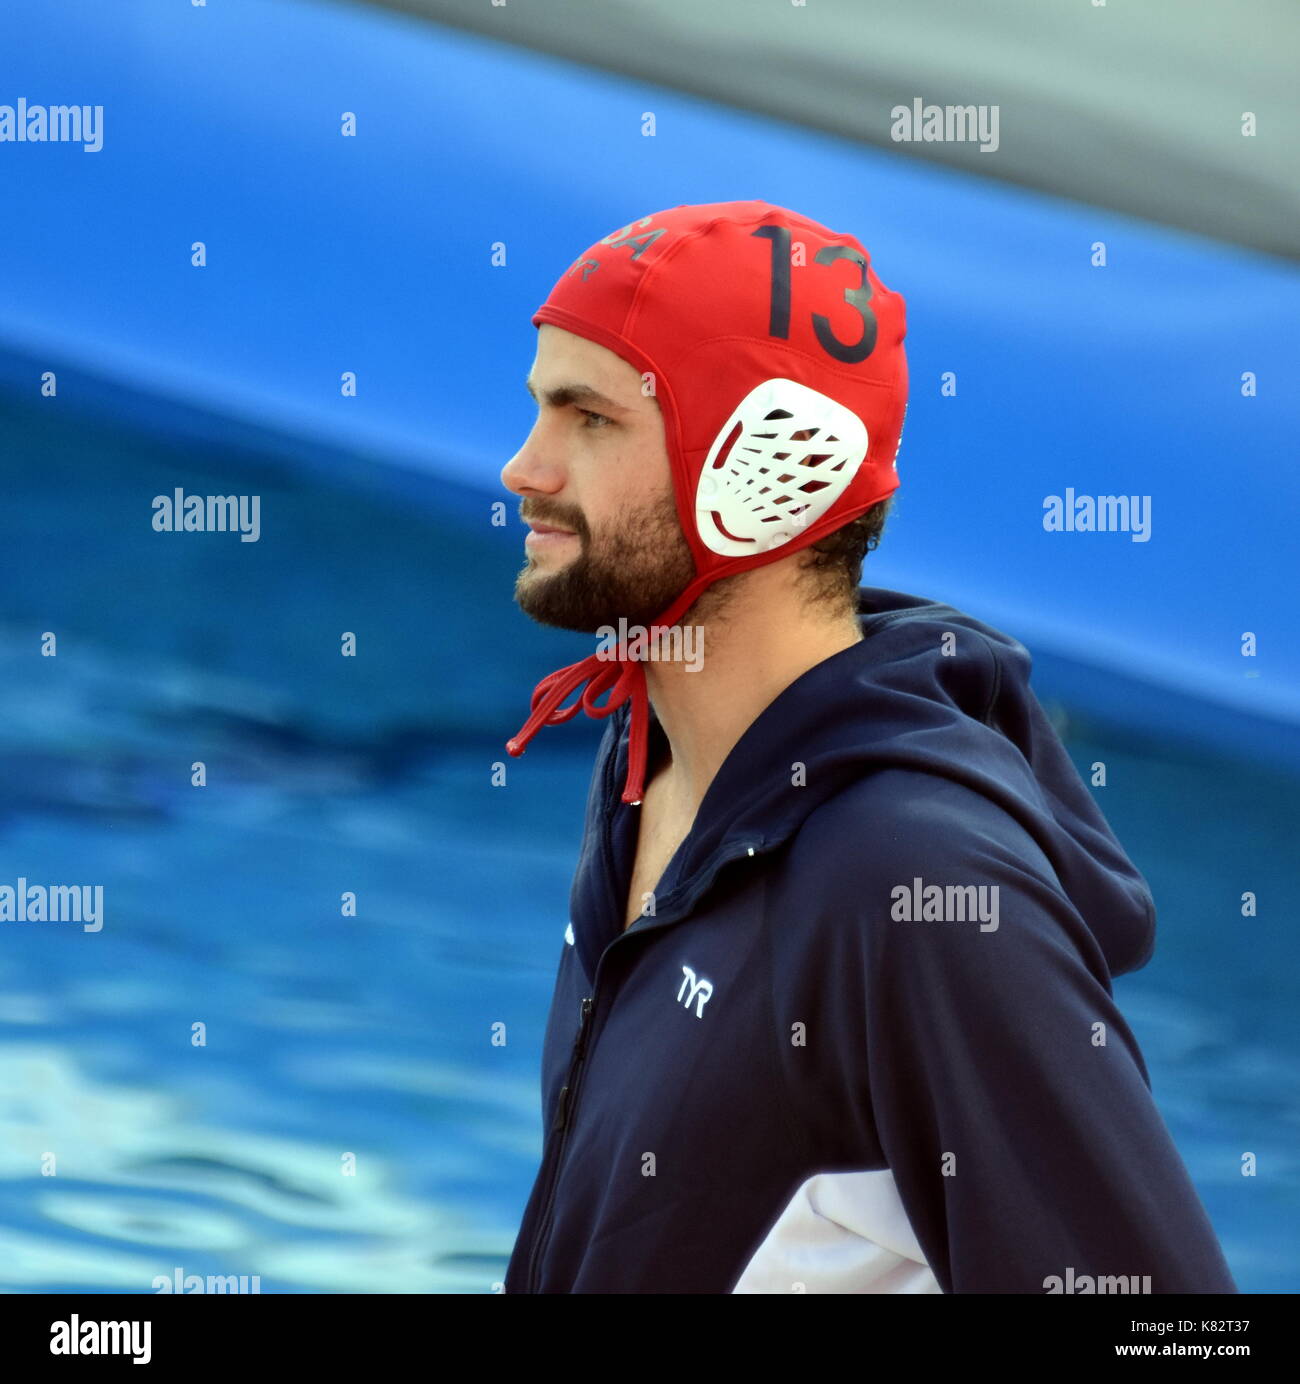 Budapest, Hungary - Jul 17, 2017. HOLLAND Drew, goalkeeper of the USA team.  FINA Waterpolo World Championship was held in Alfred Hajos Swimming Centre  Stock Photo - Alamy